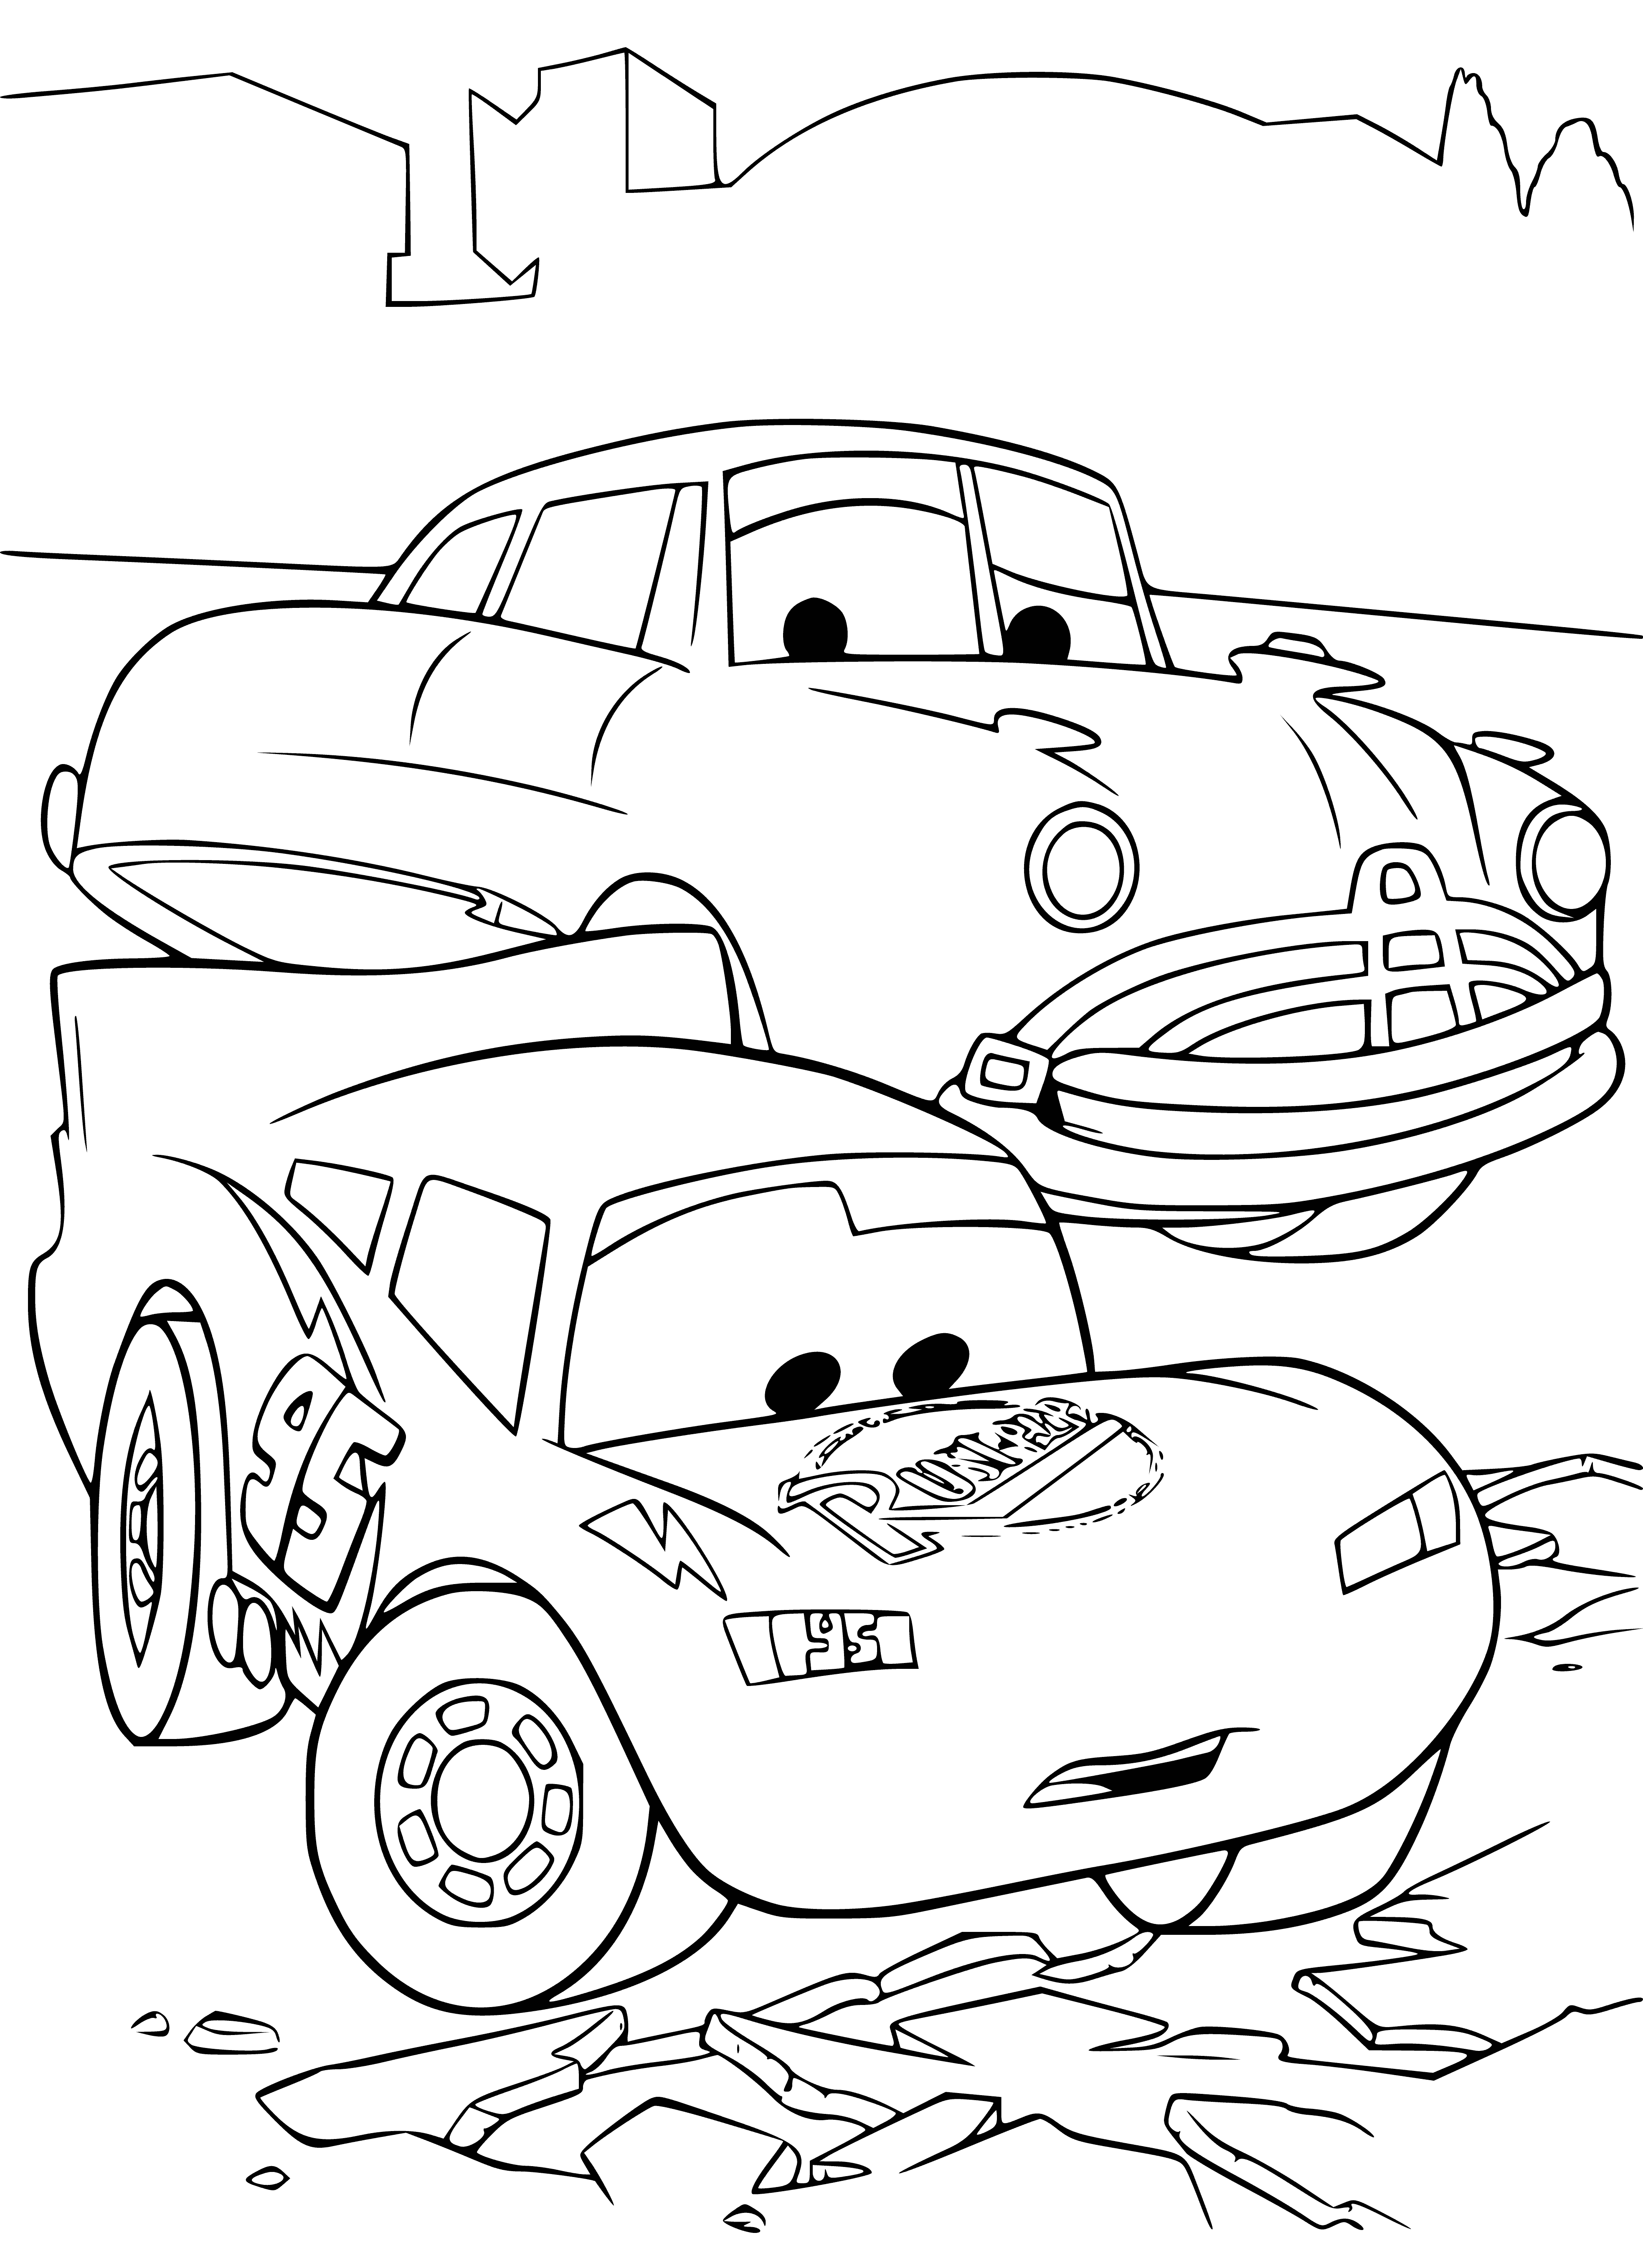 Doc and McQueen coloring page